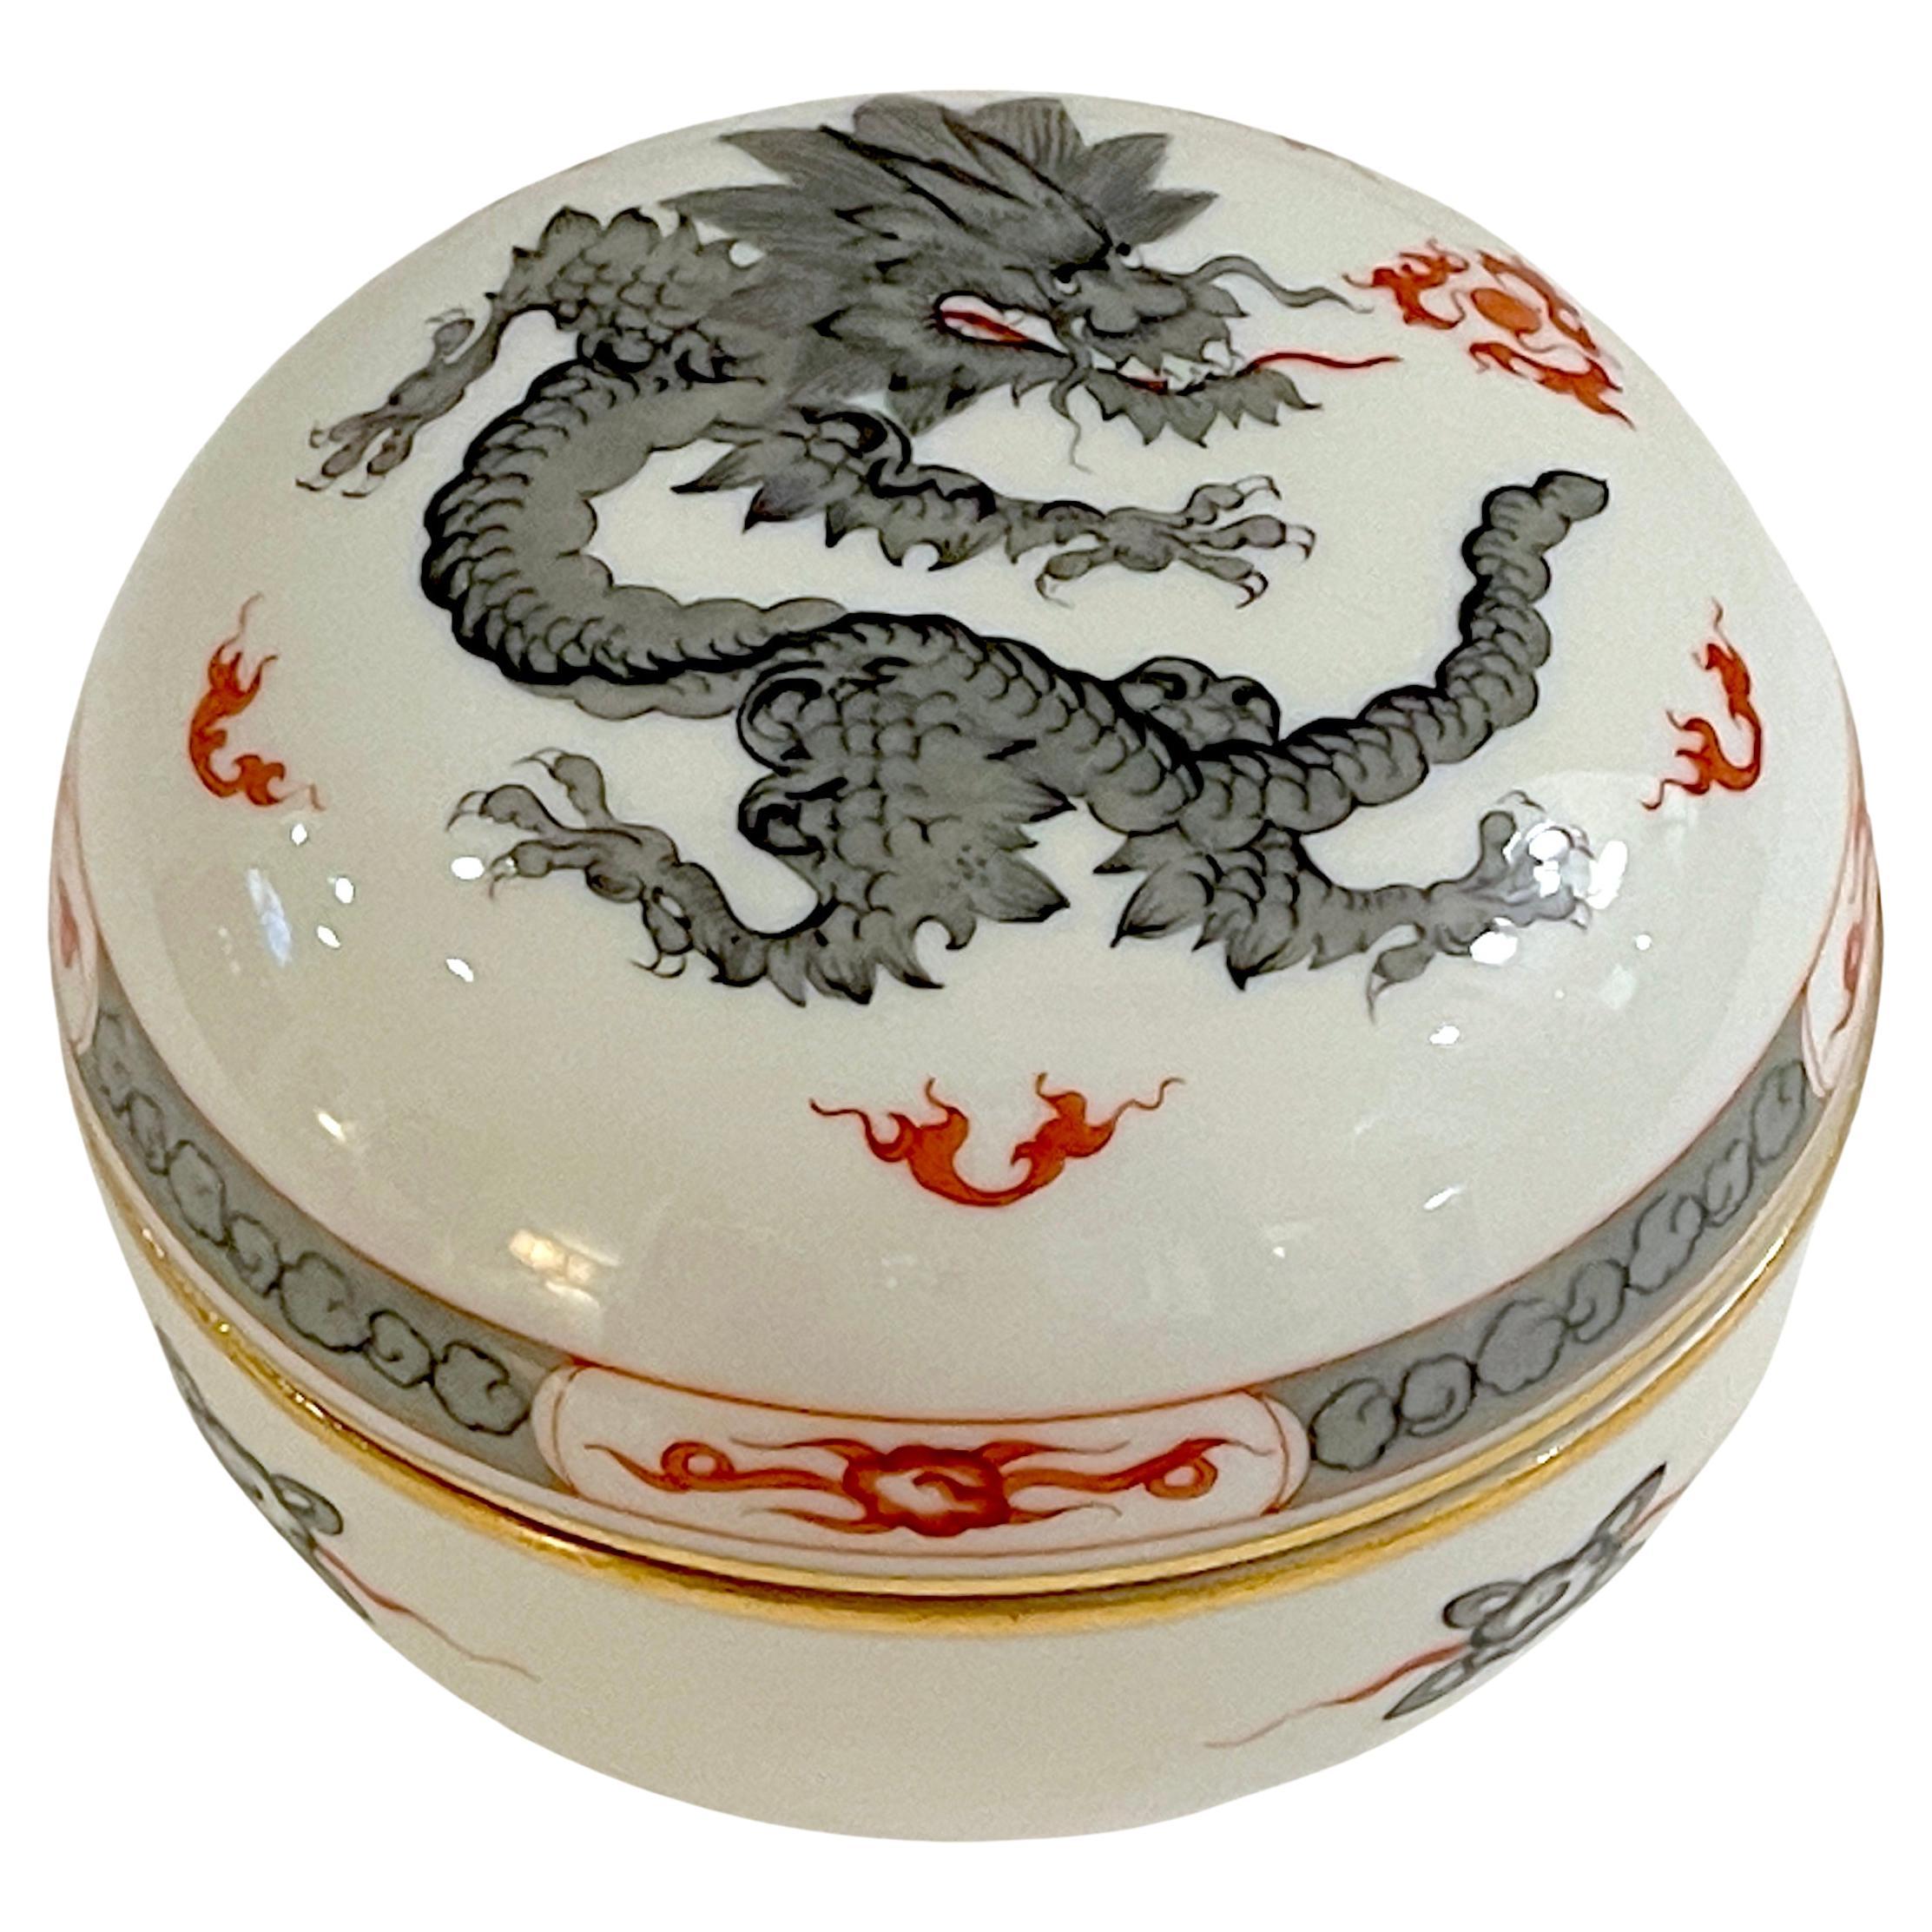 Meissen Porcelain Black  'Ming Dragon' Covered Box 
Germany, Post WWII 20th Century, Two Slash Canceled Blue Crossed Swords Mark

A fine Meissen Porcelain Black 'Ming Dragon' Covered Box, made in post-World War II Germany during the 20th century.